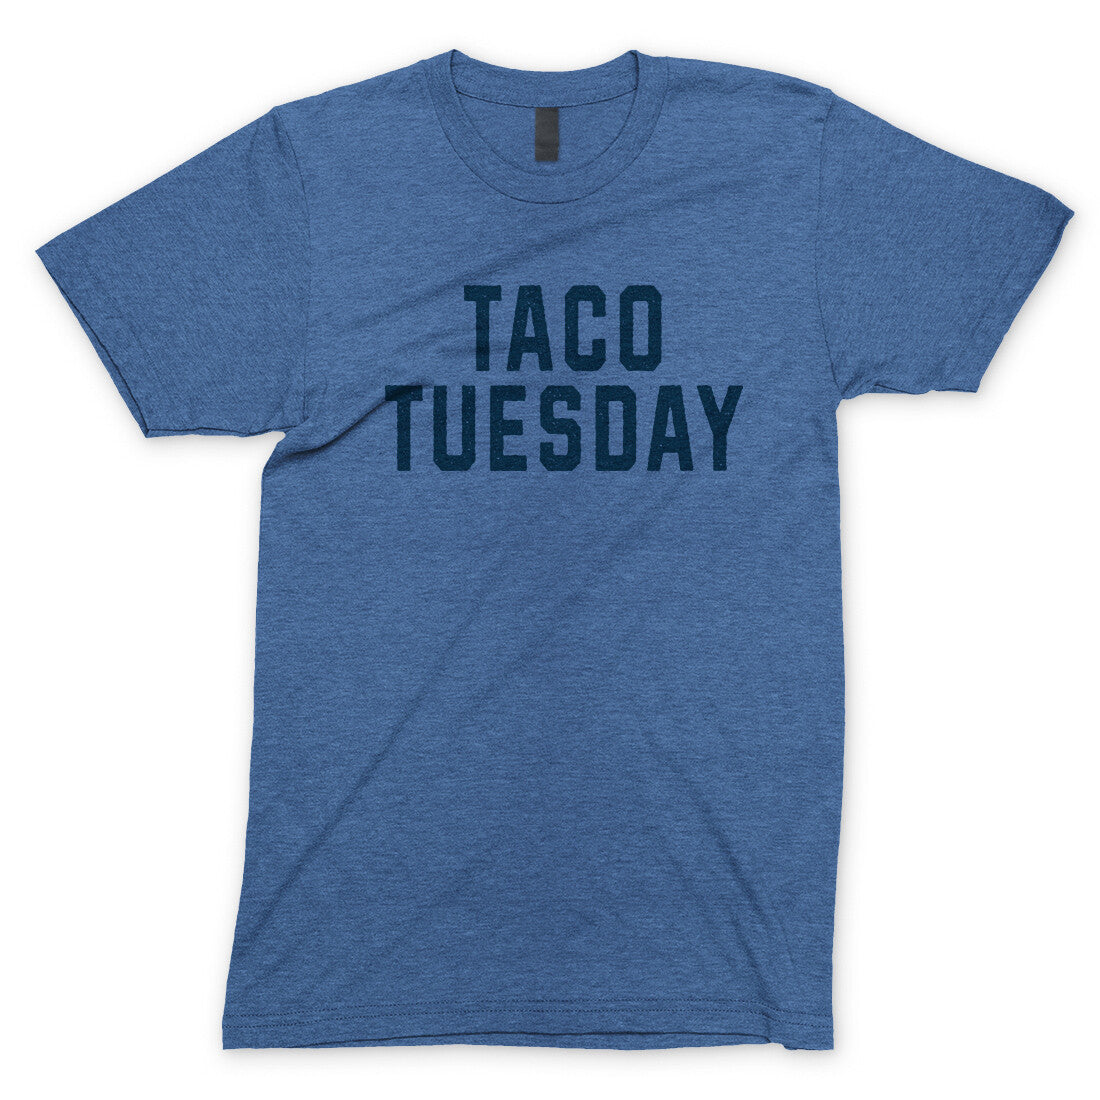 Taco Tuesday in Heather Royal Color